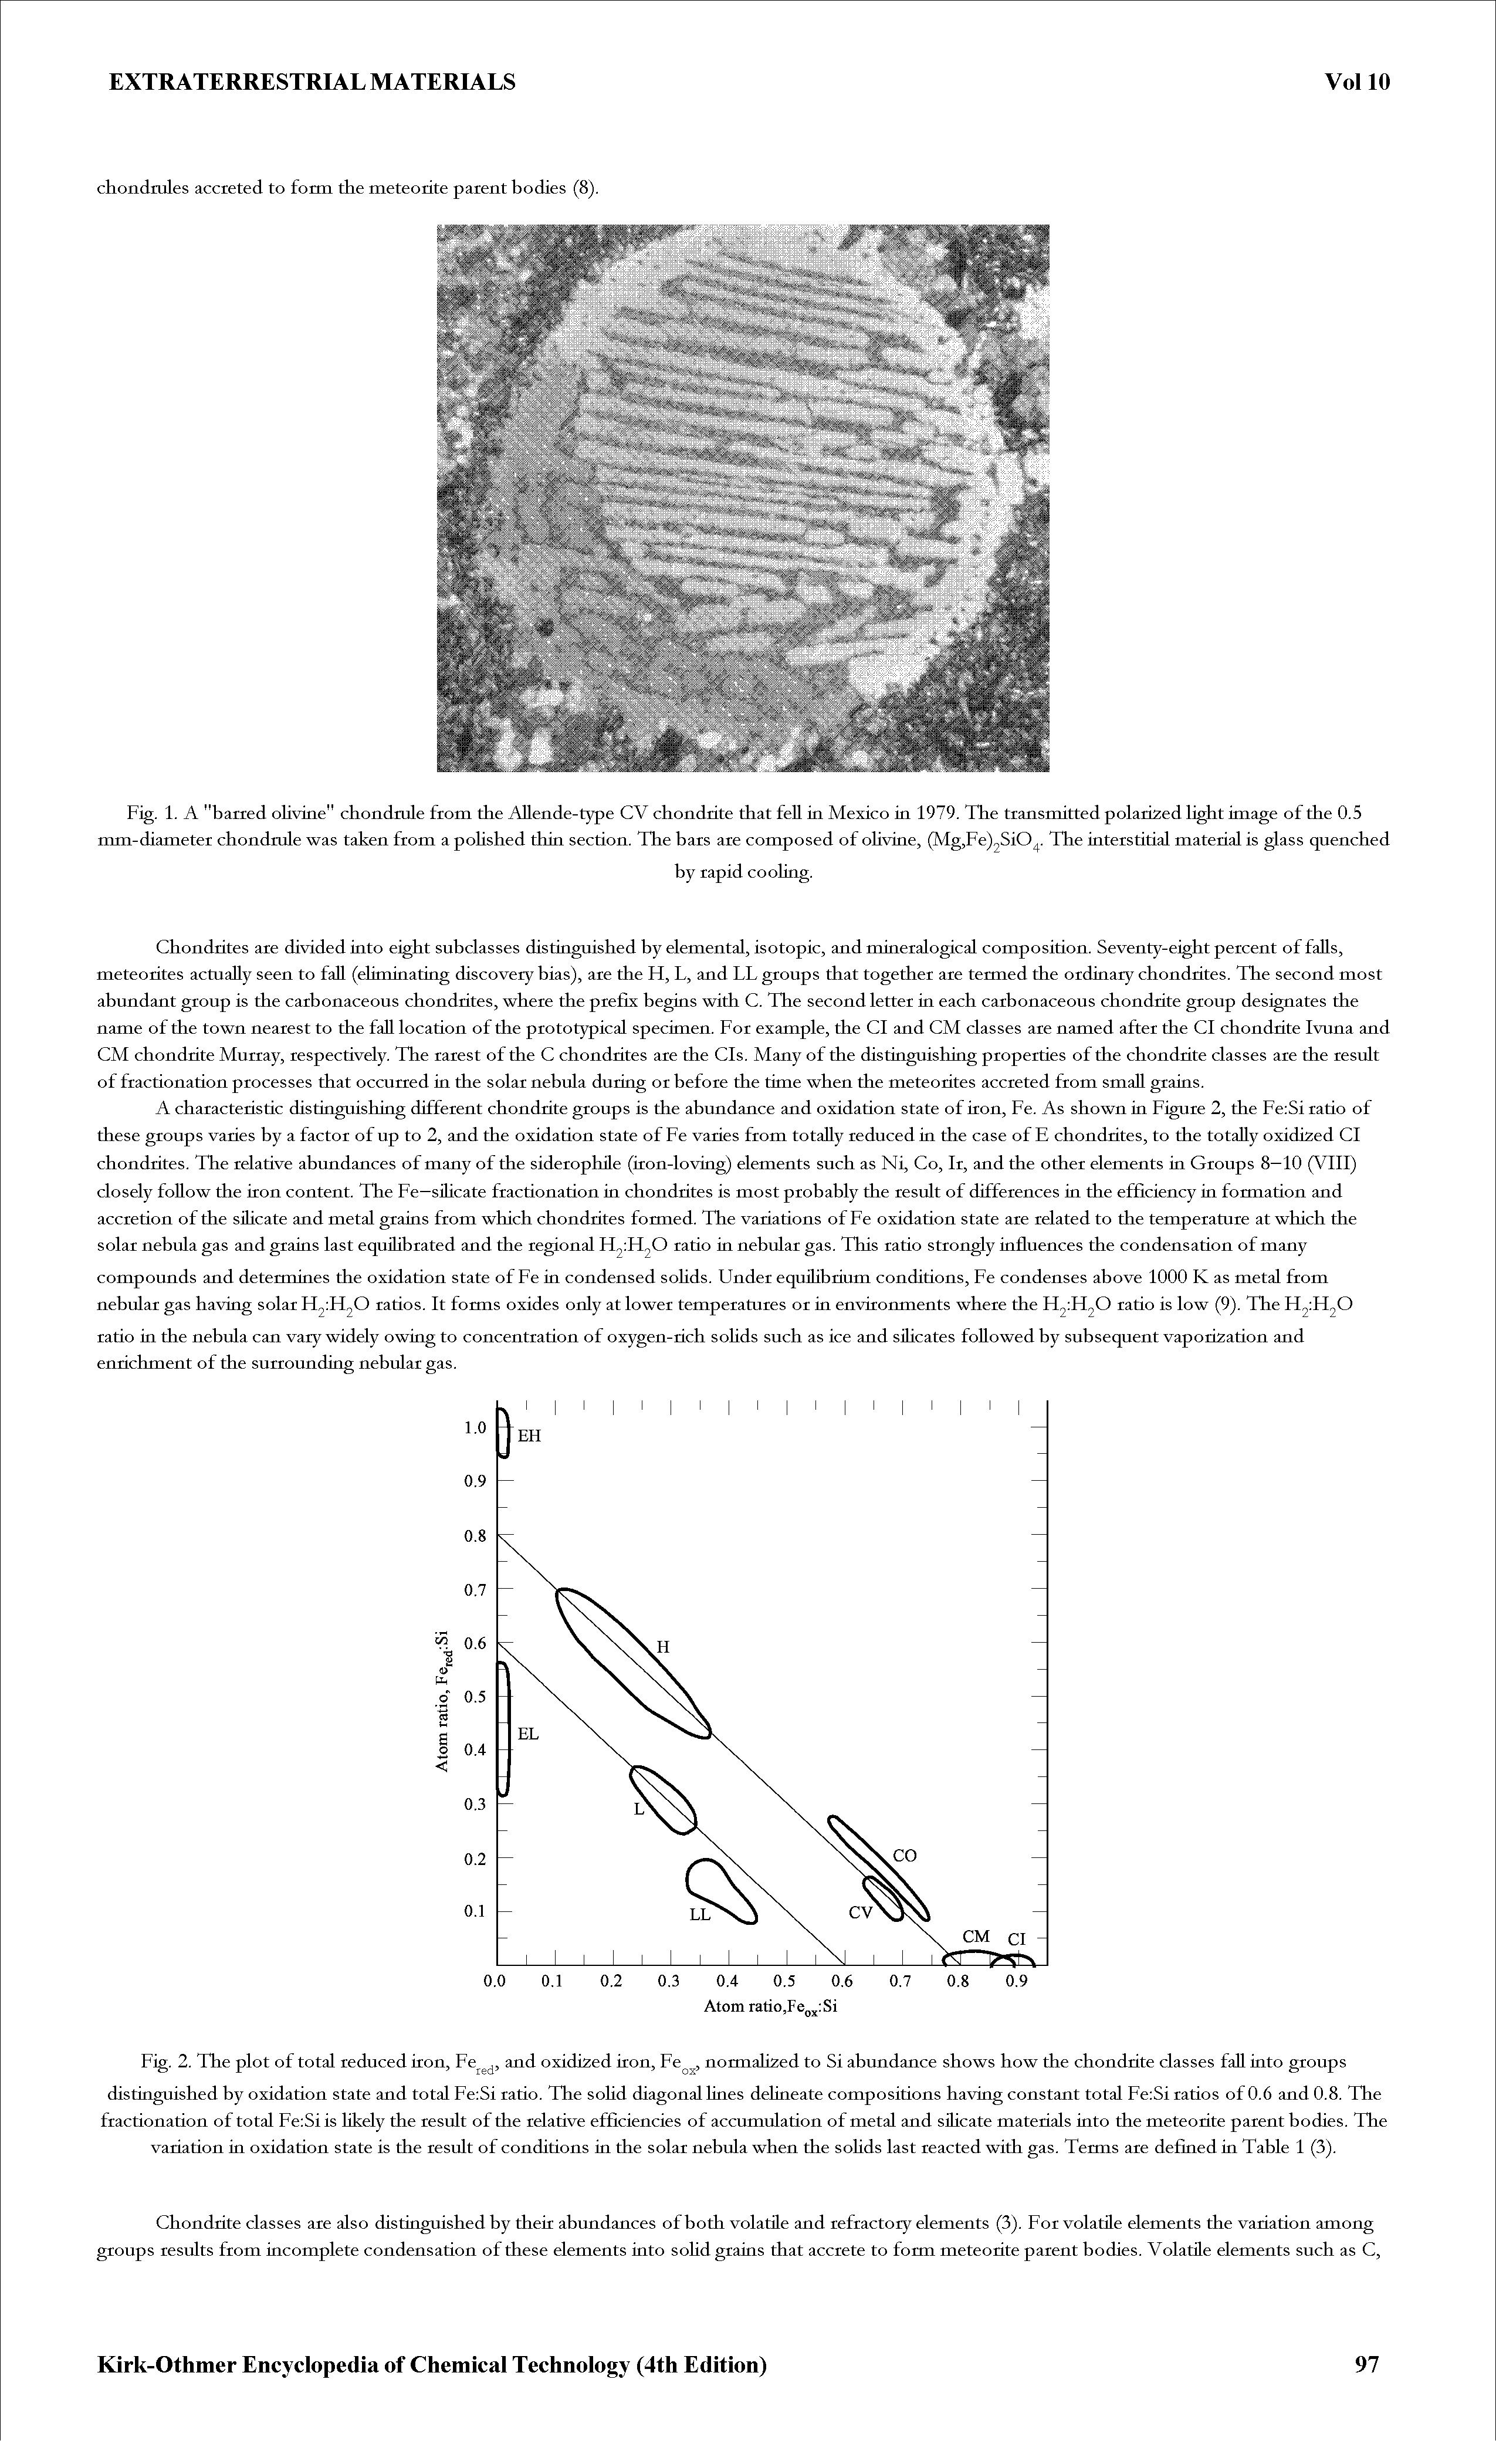 Fig. 2. The plot of total reduced iron, Fe, and oxidized iron, Fe, normalized to Si abundance shows how the chondrite classes fall into groups distinguished by oxidation state and total Fe Si ratio. The soHd diagonal lines delineate compositions having constant total Fe Si ratios of 0.6 and 0.8. The fractionation of total Fe Si is likely the result of the relative efficiencies of accumulation of metal and siUcate materials into the meteorite parent bodies. The variation in oxidation state is the result of conditions in the solar nebula when the soHds last reacted with gas. Terms are defined in Table 1 (3).